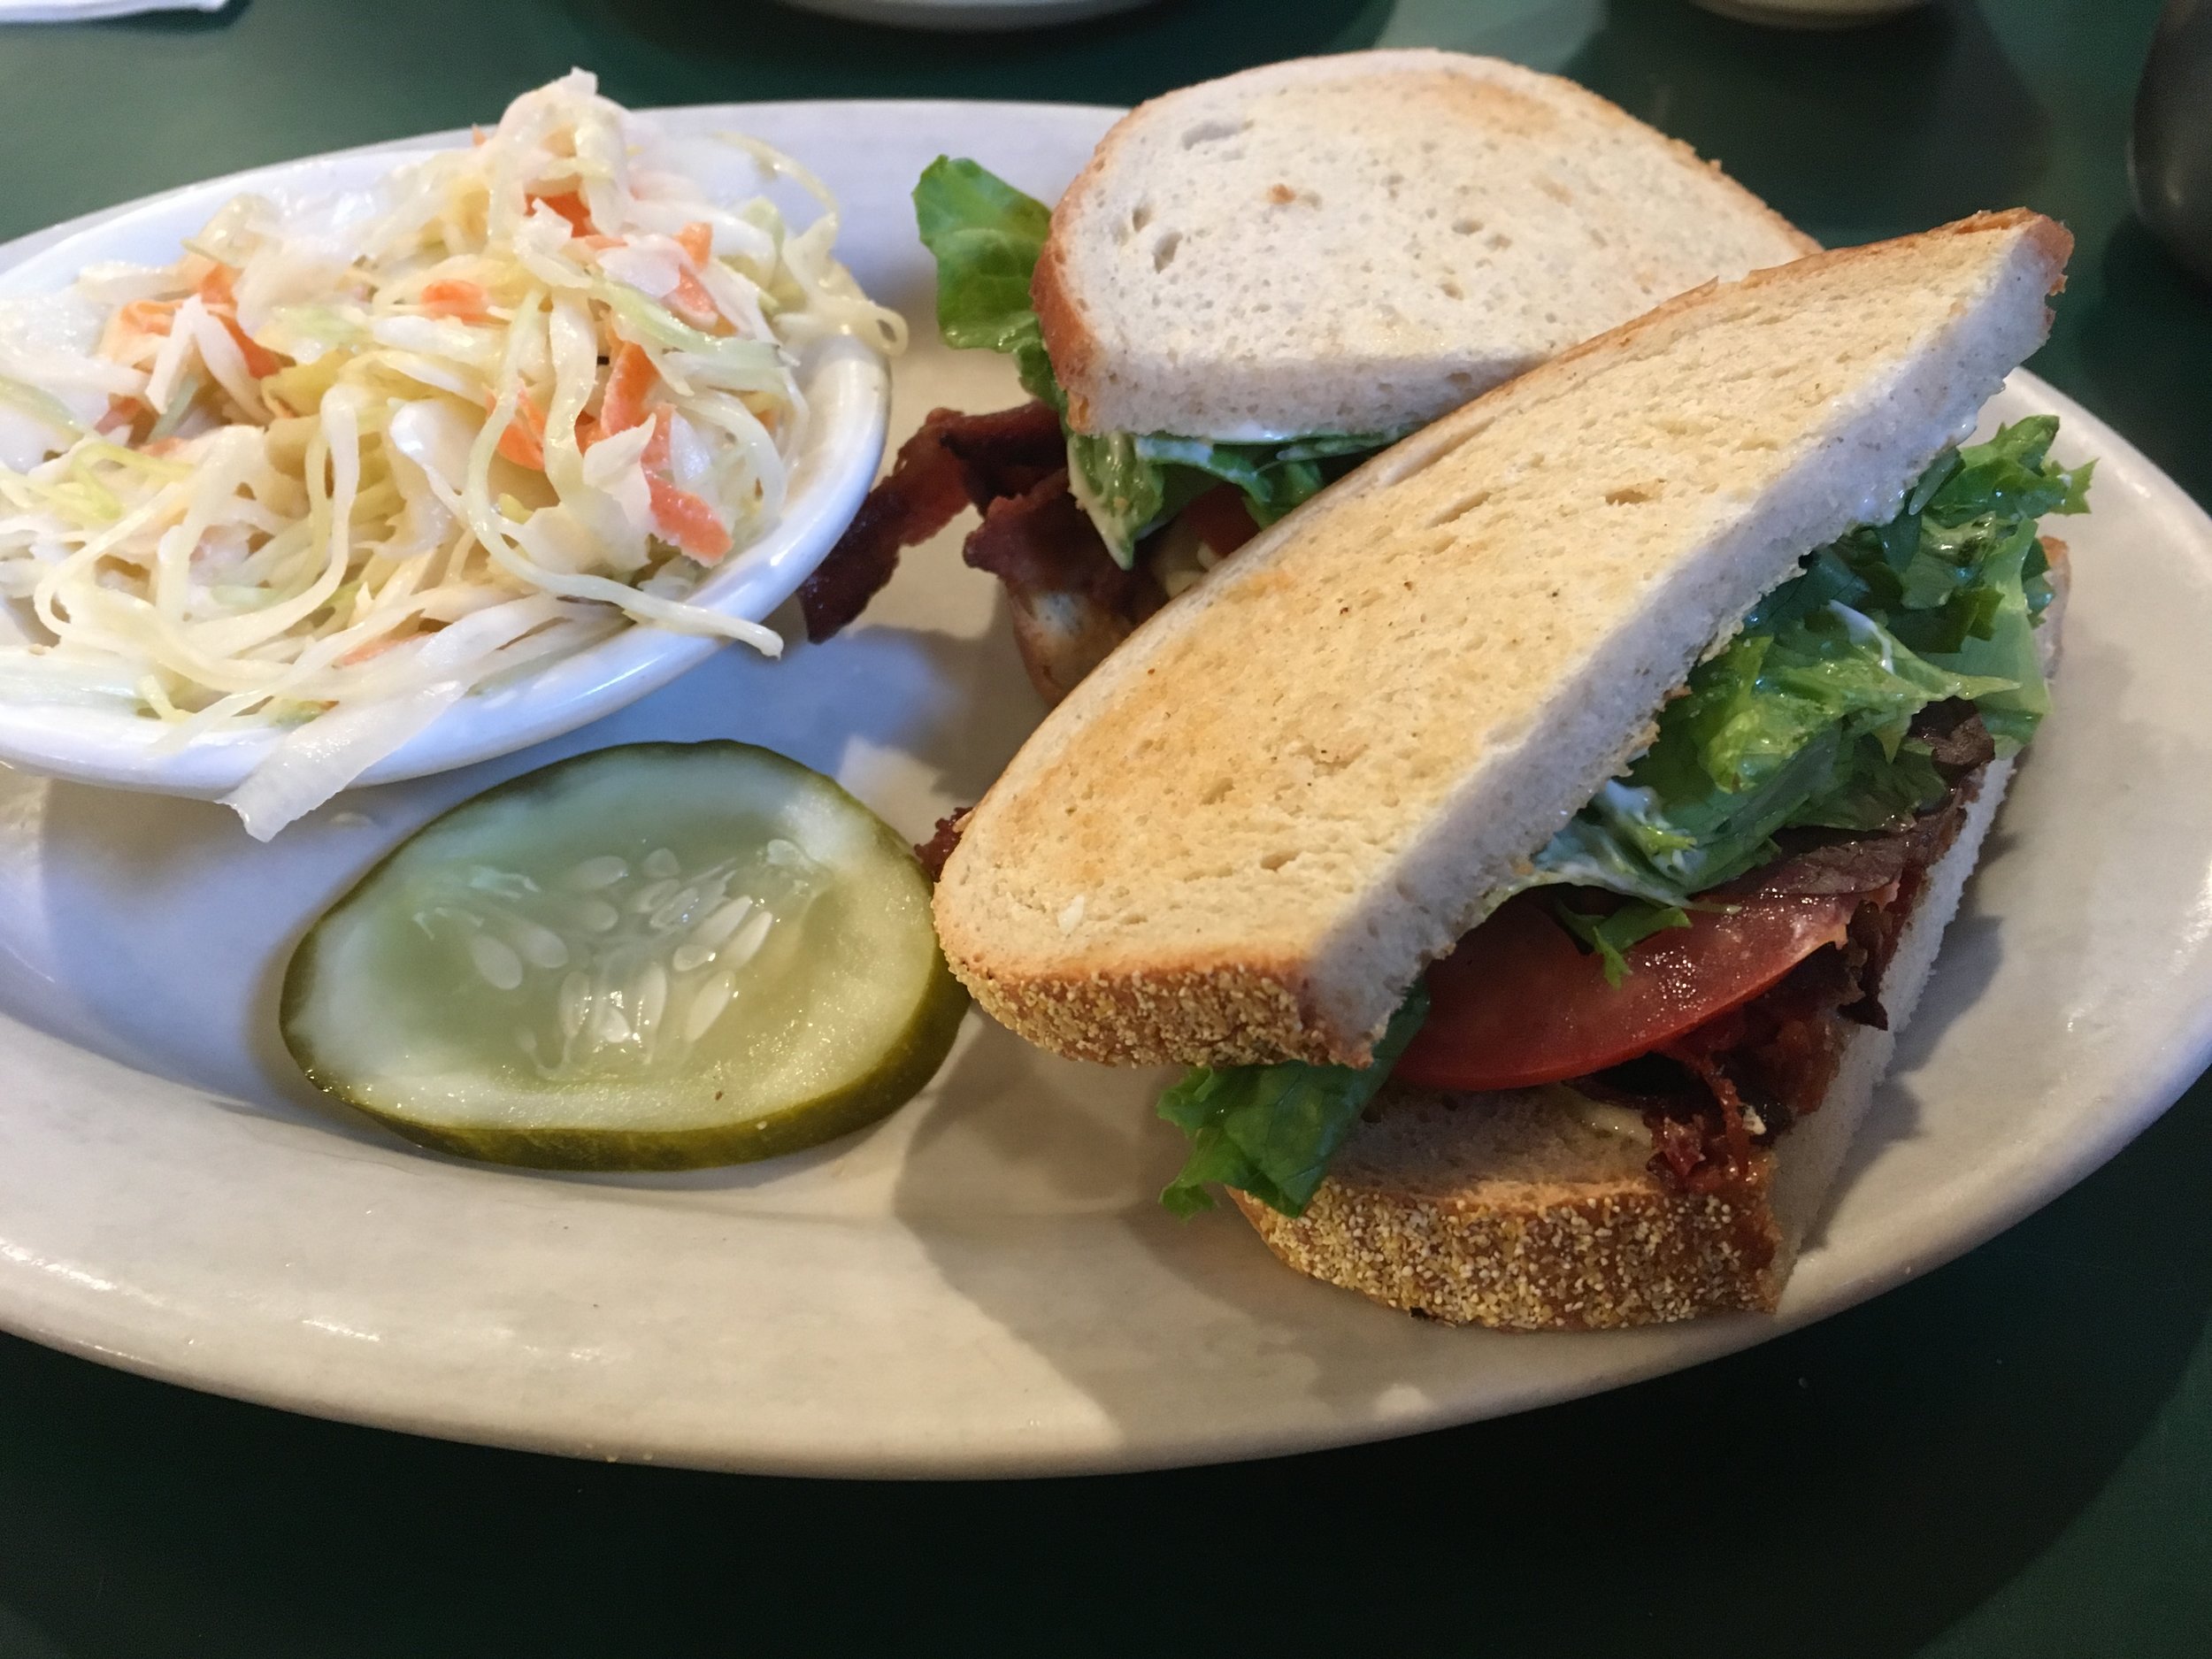 Can't go wrong with their BLT